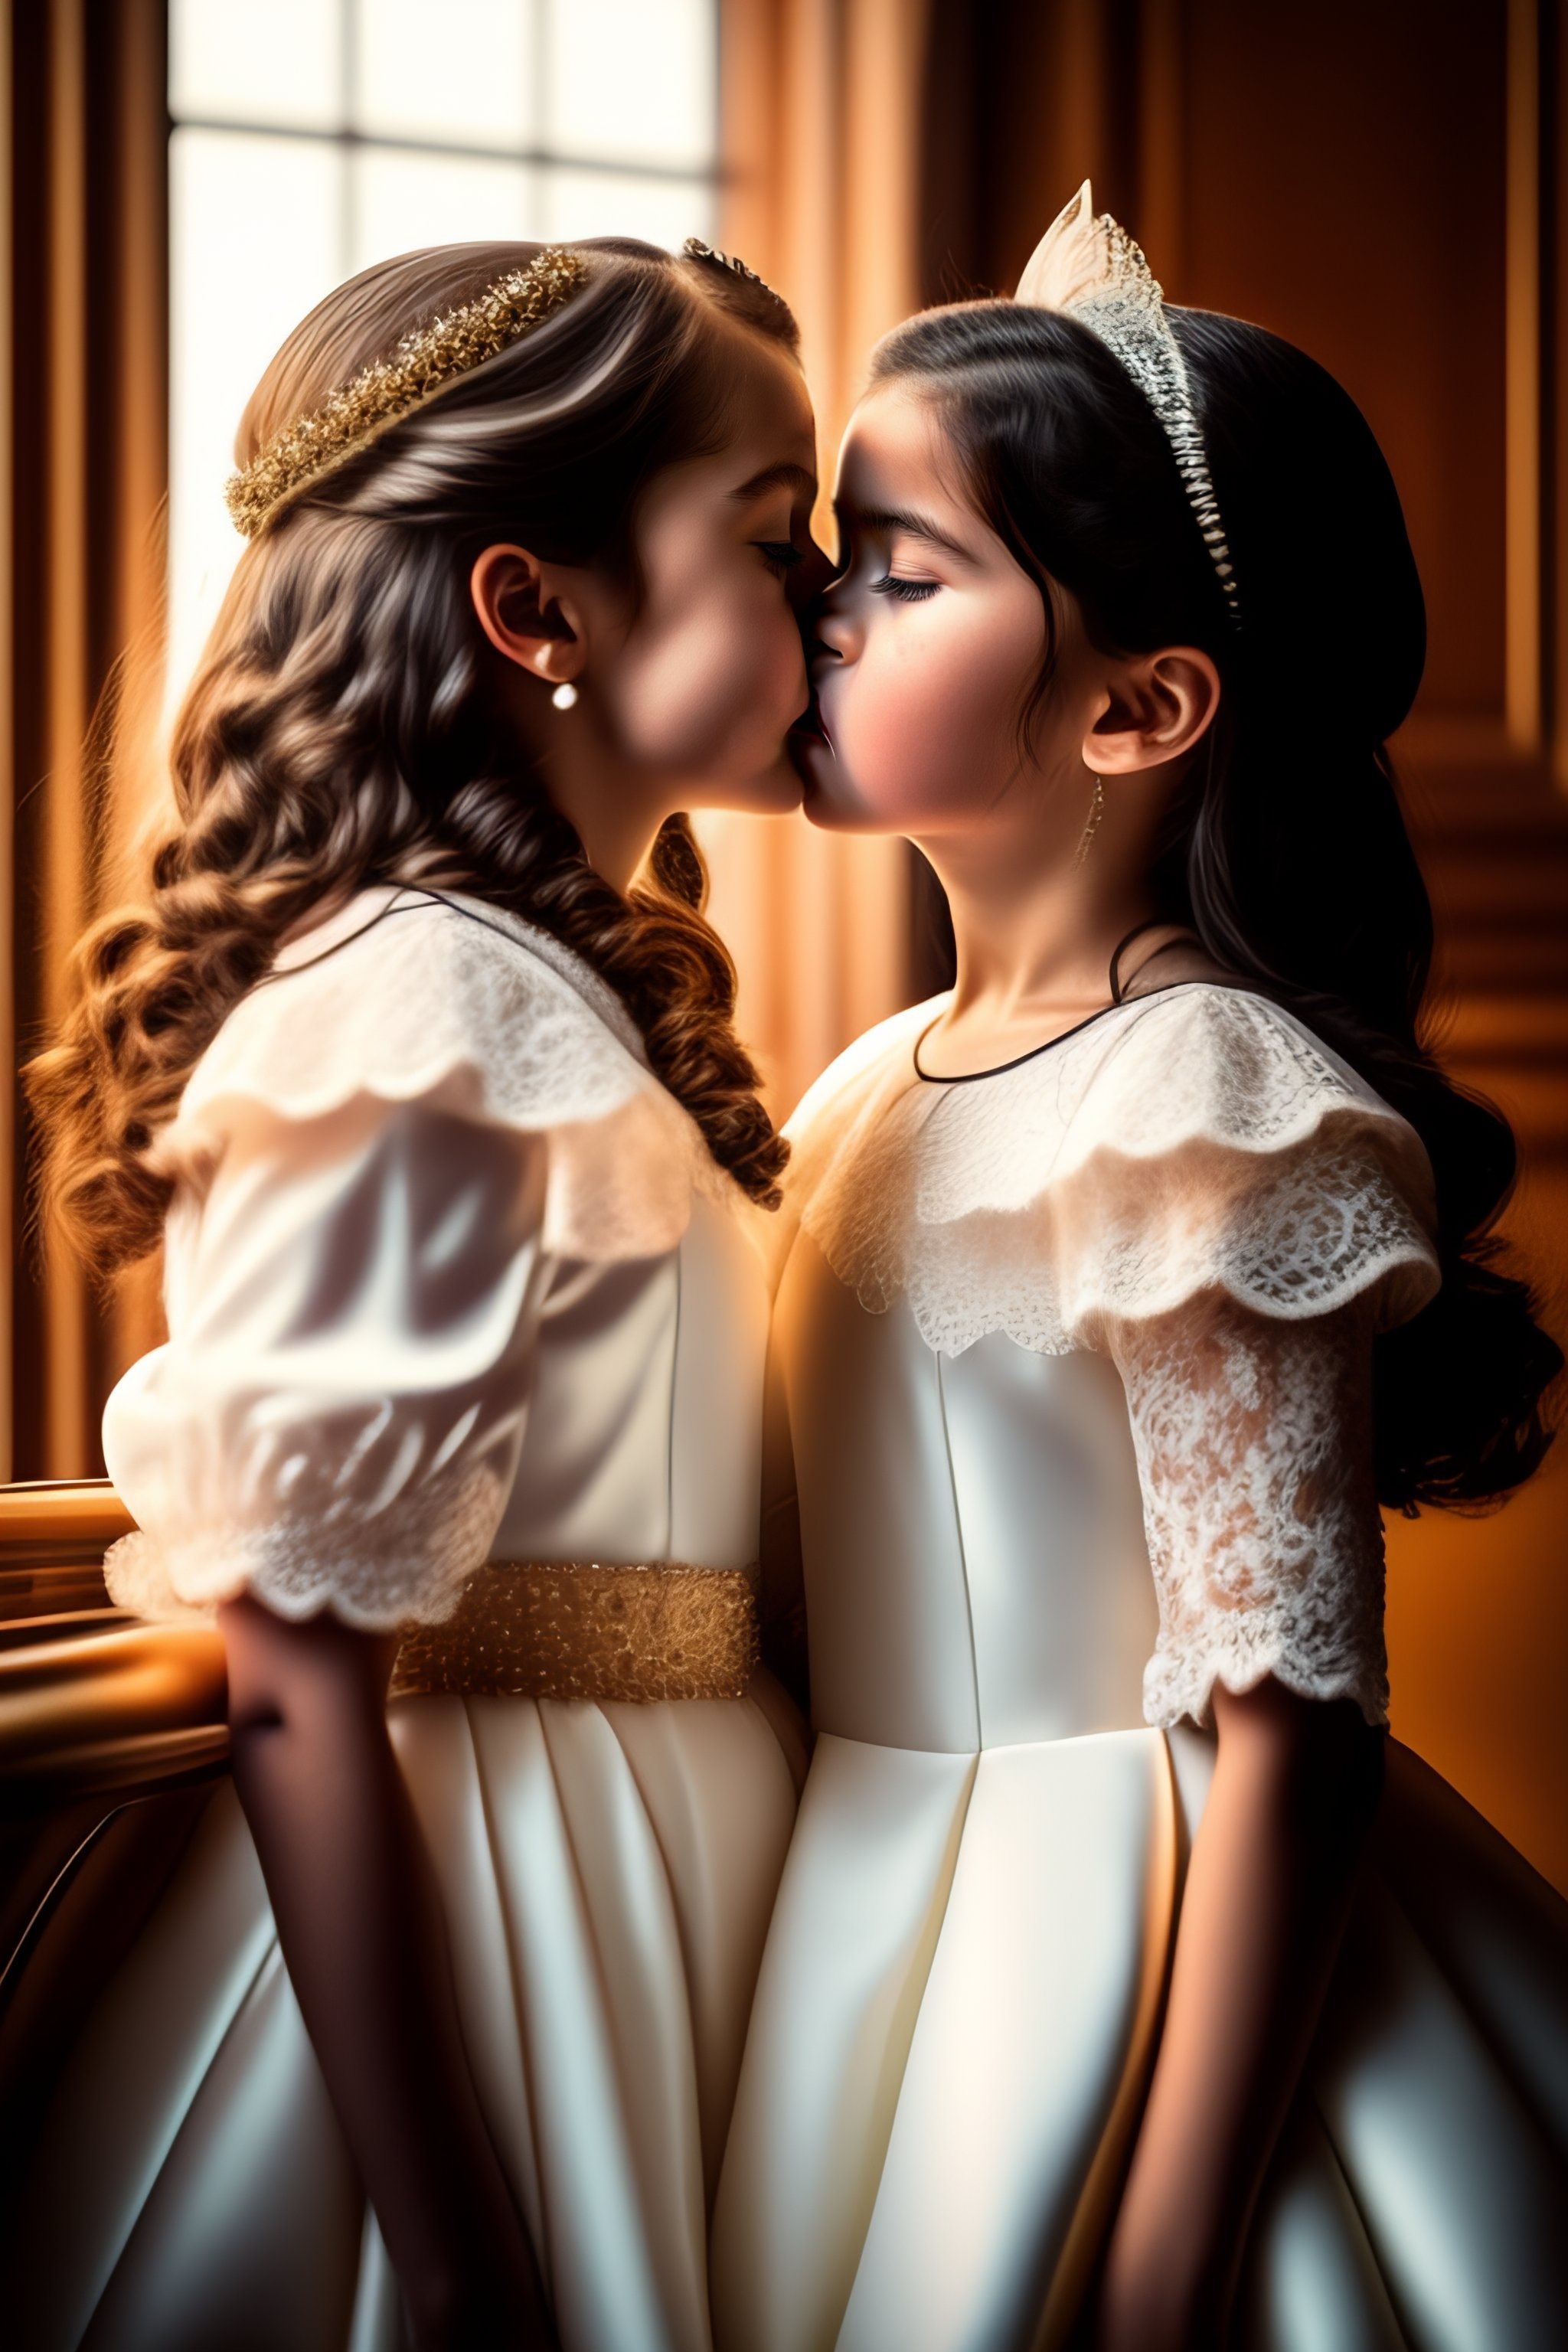 Lexica Beautiful Photo Realistic Picture Of Two Ten Year Old Girls